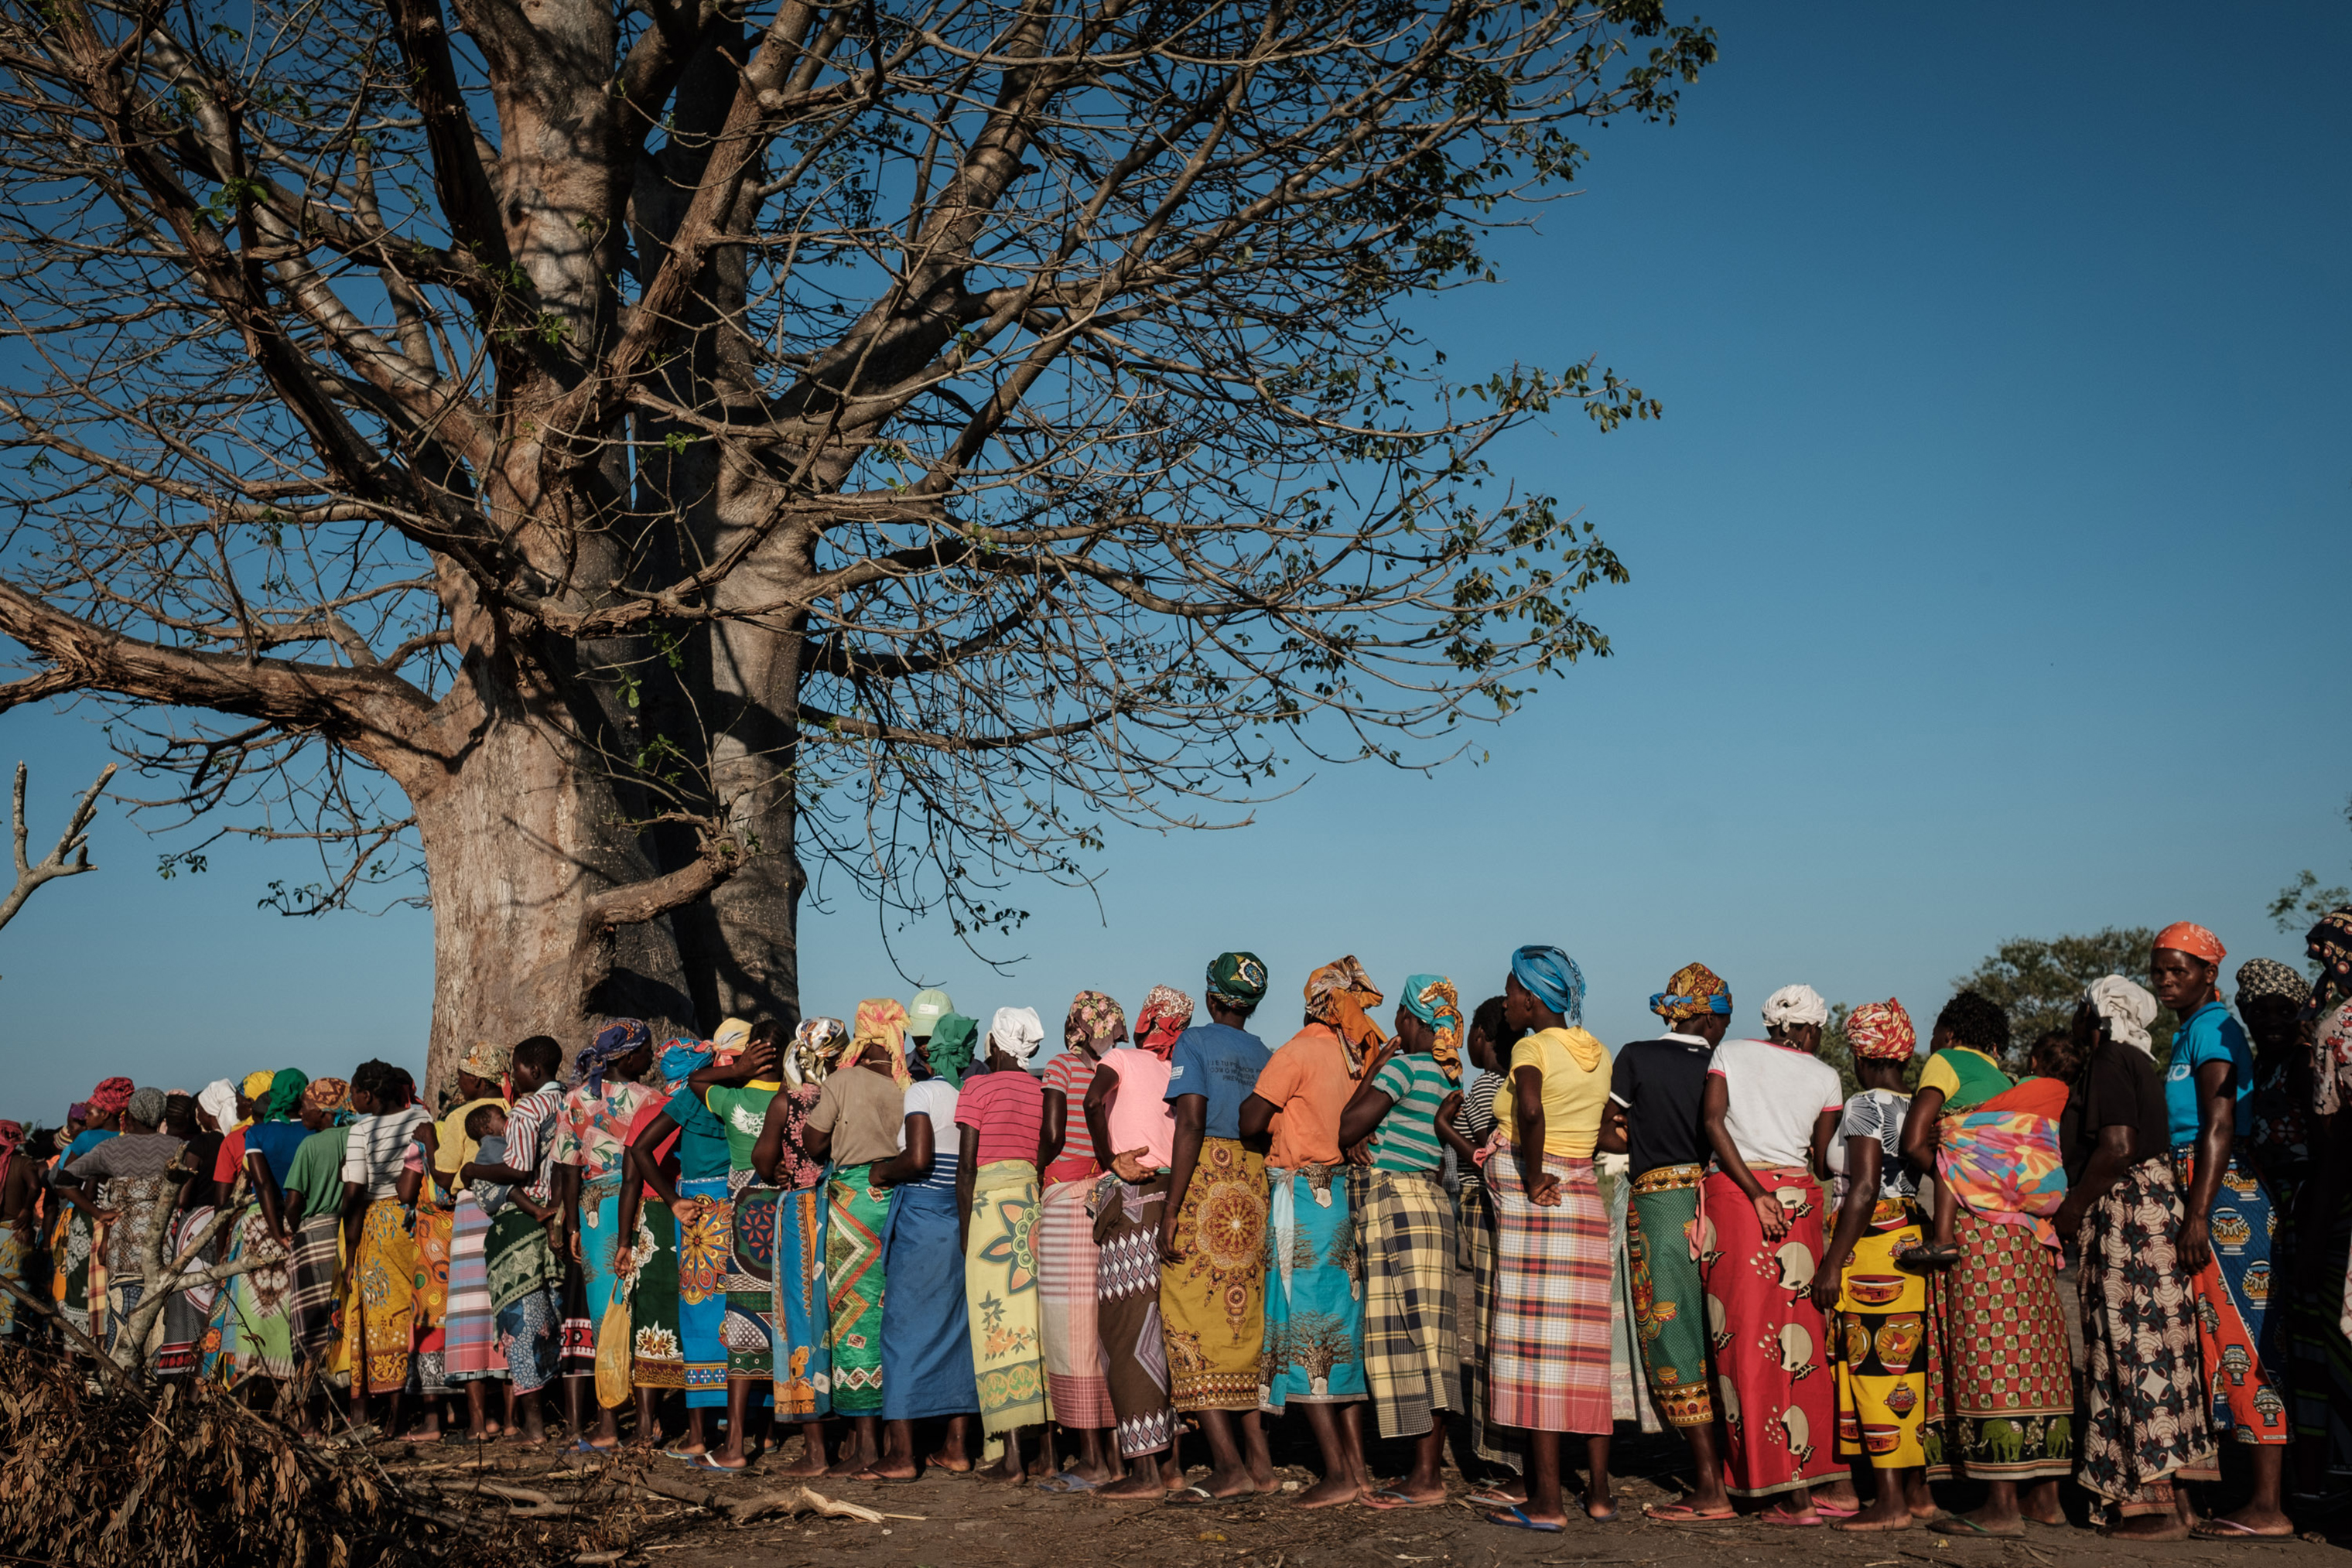 Women wait in a line to receive relief supplies from a South African relief organization in Estaquinha, Mozambique, on March 26, 2019. (Yasuyoshi Chiba—AFP/Getty Images)